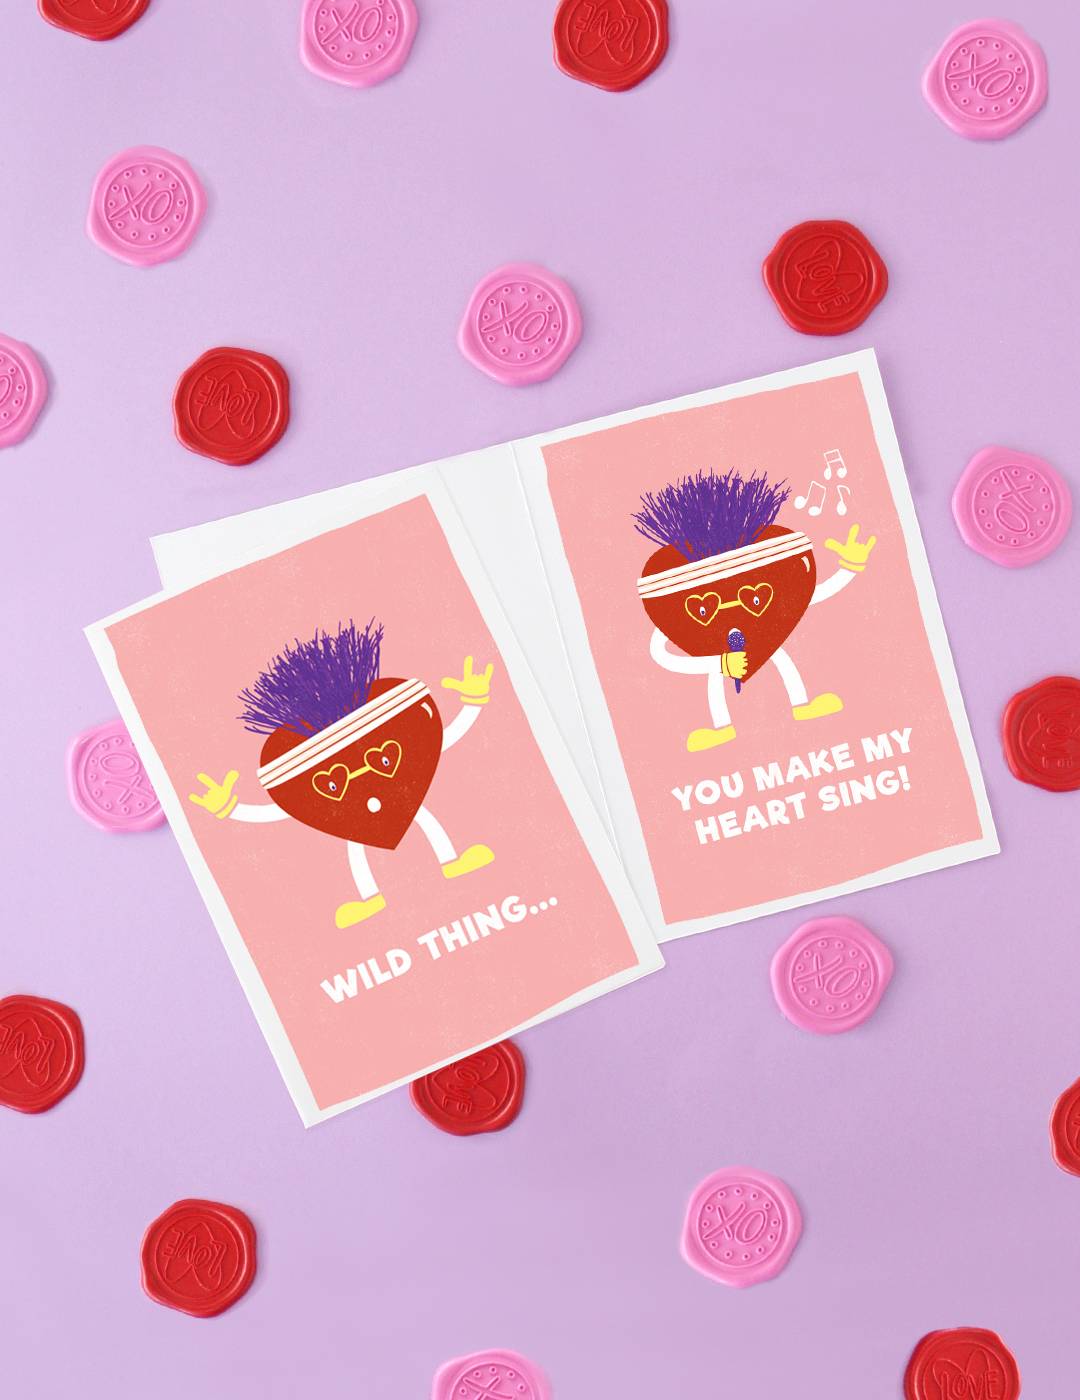 Valentines day cards on a purple, pink, and red background.